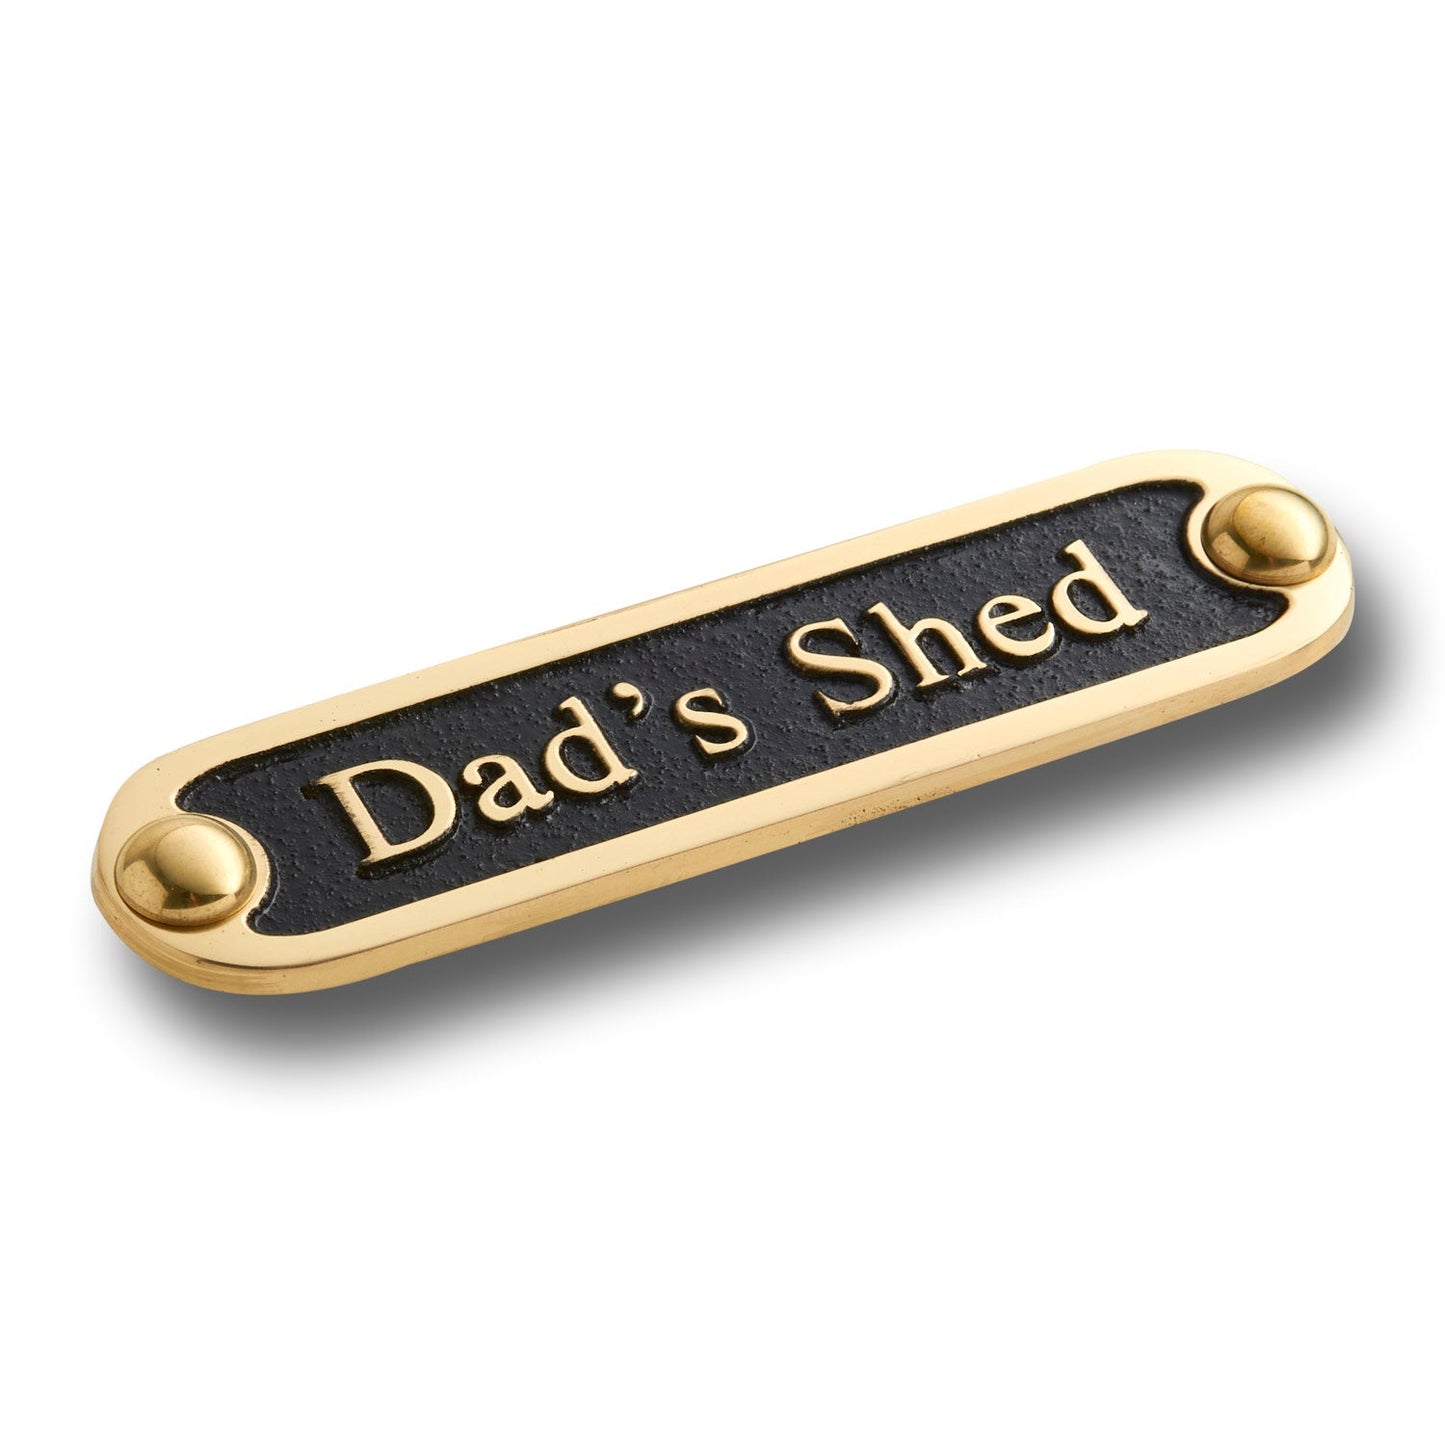 'Dad’s Shed' Door Sign - The Metal Foundry